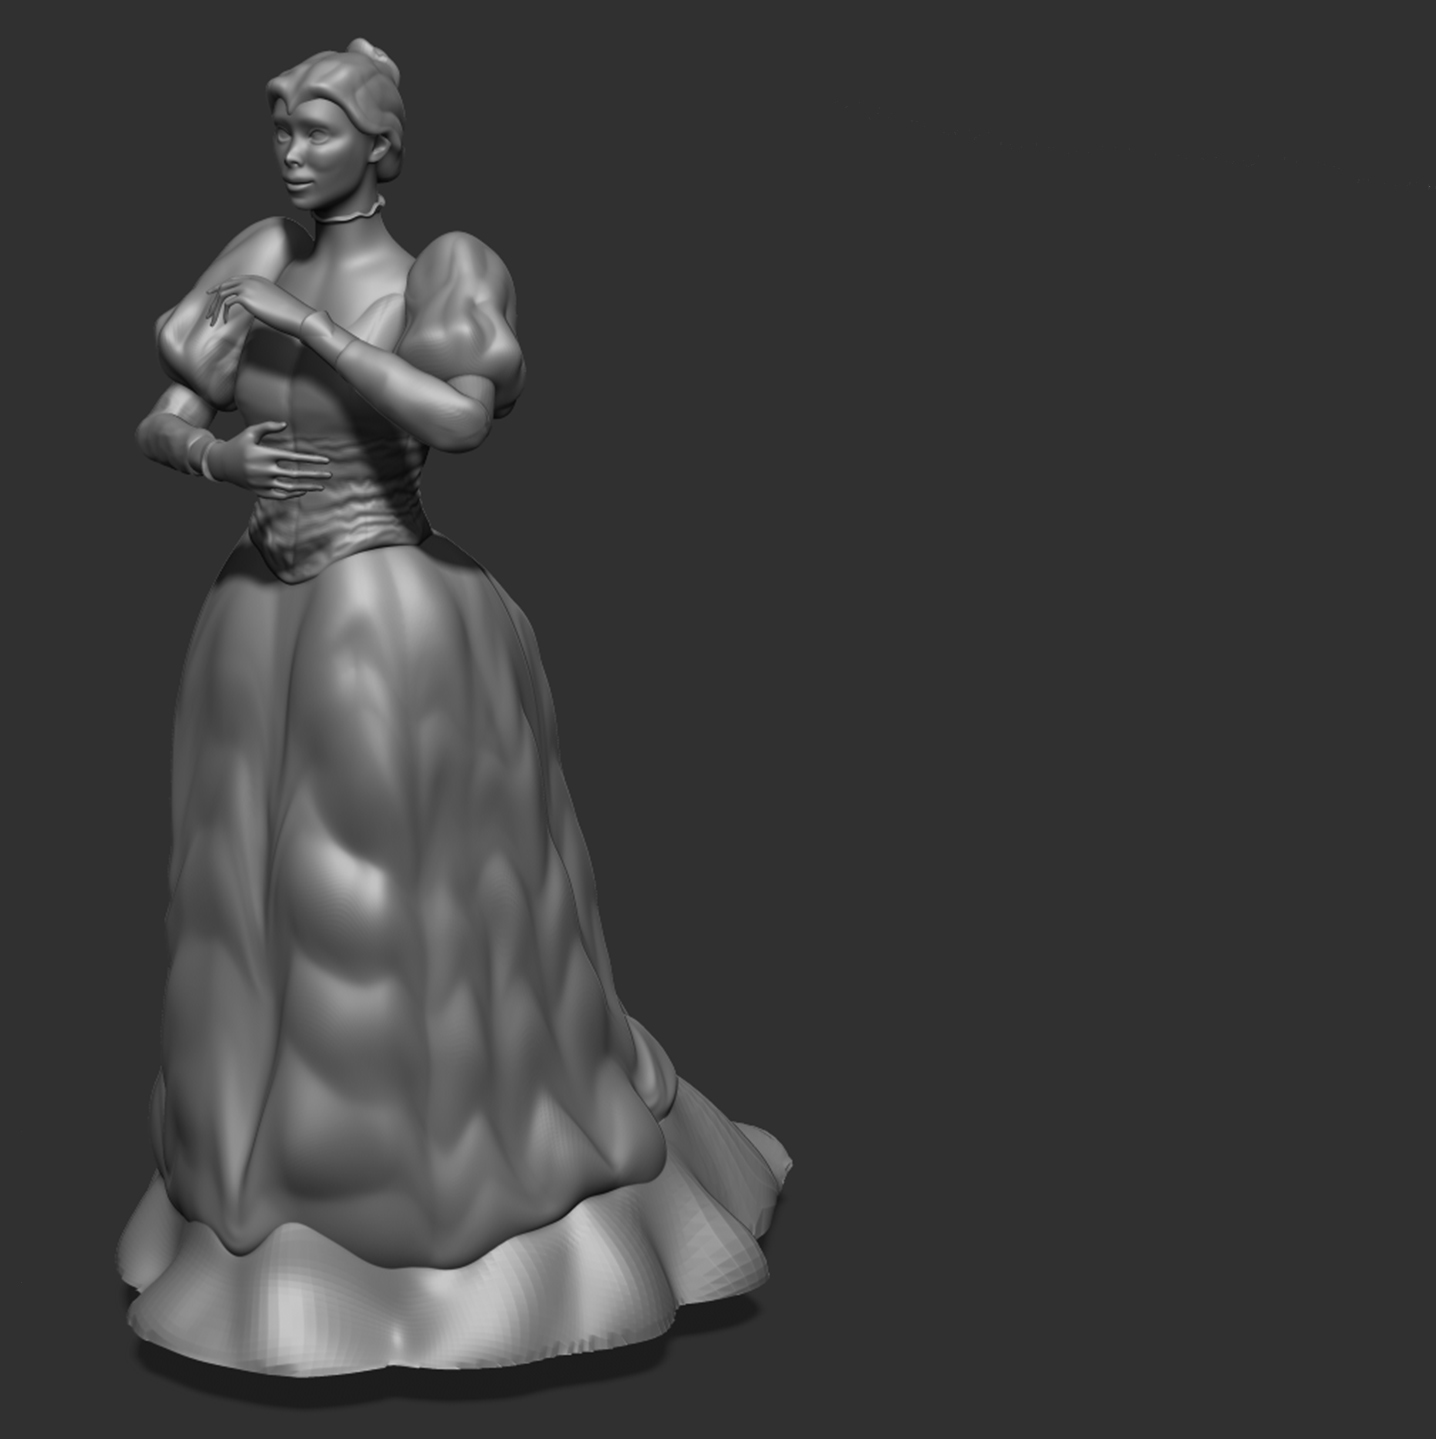 An image of a three quarters view of a digital 3d sculpt of a bride, she is missing her veil and other accessories